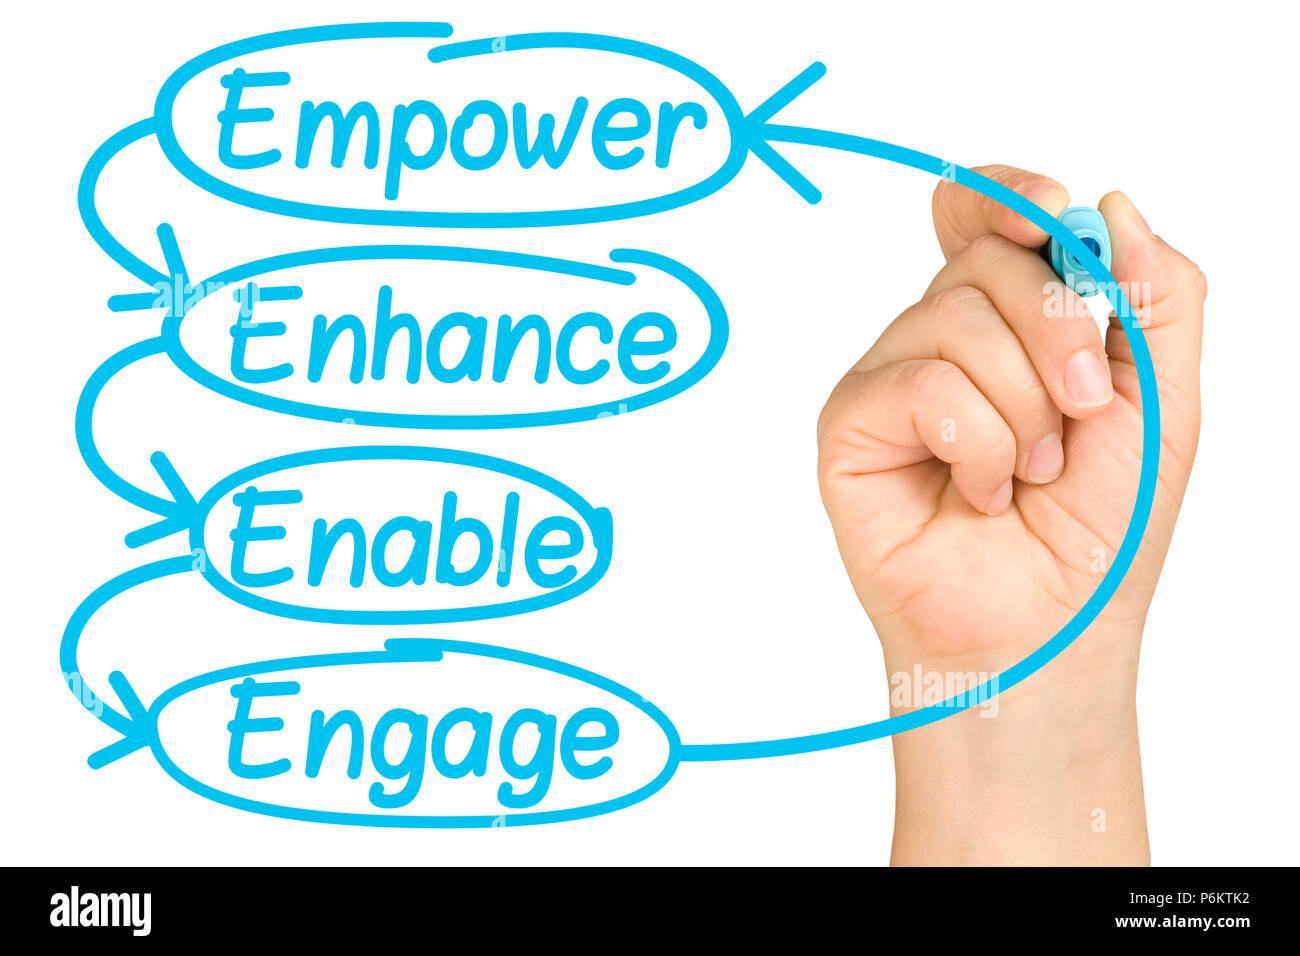 hand writing Empower Enhance Enable Engage employee empowerment cycle on clear glass whiteboard isolated Stock Photo